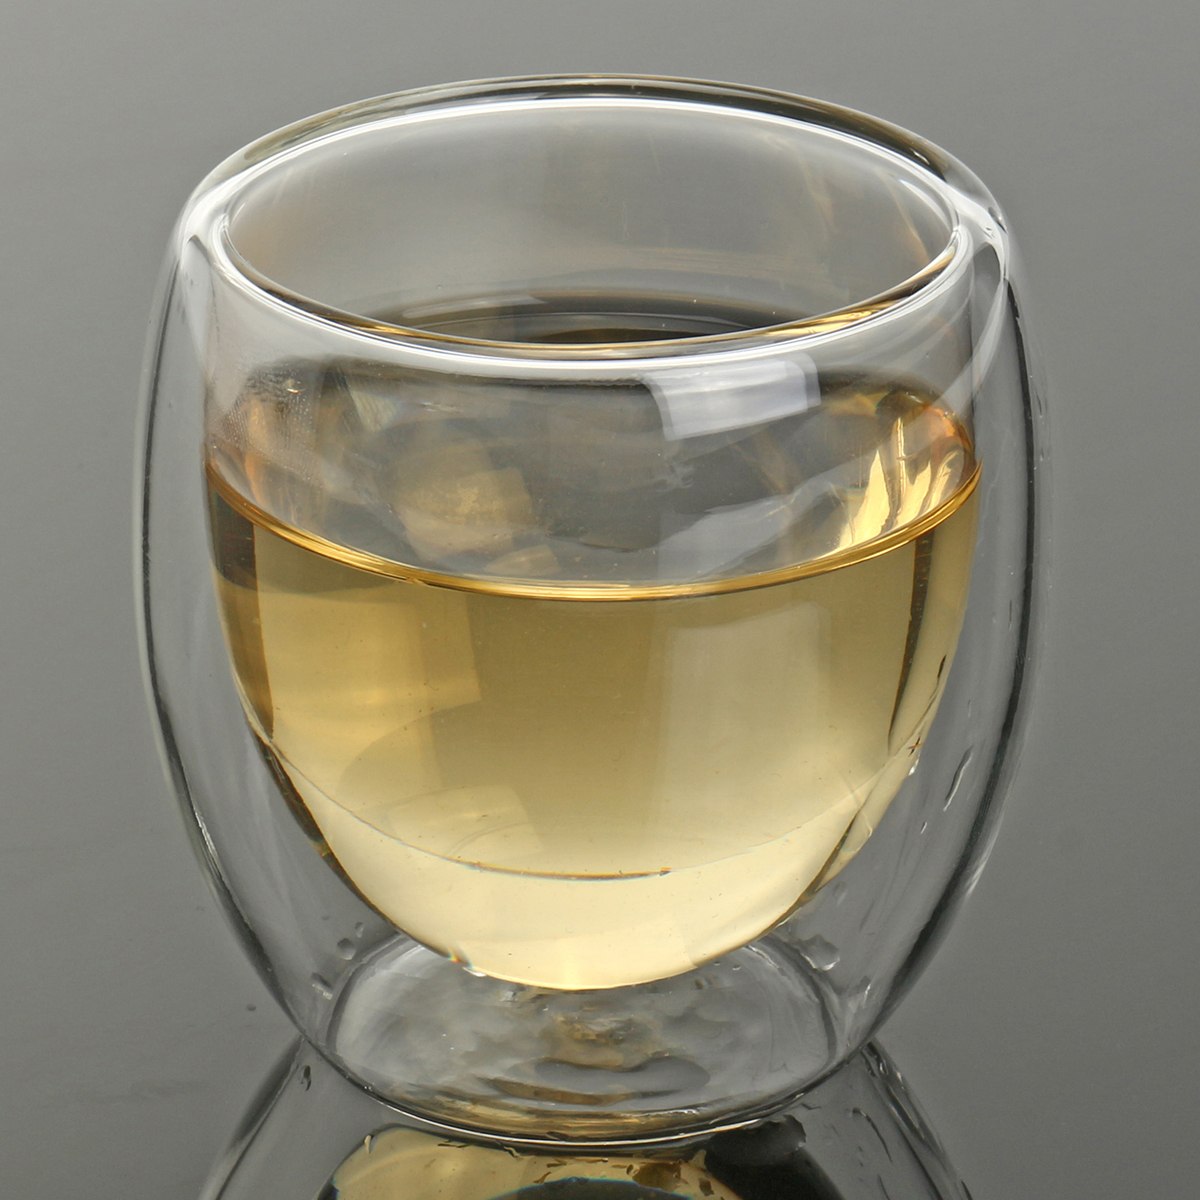 80ml-Clear-Glass-Double-Wall-Mug-Cup-Insulated-Thermal-Office-Tea-Drinking-Tea-Container-1454945-7